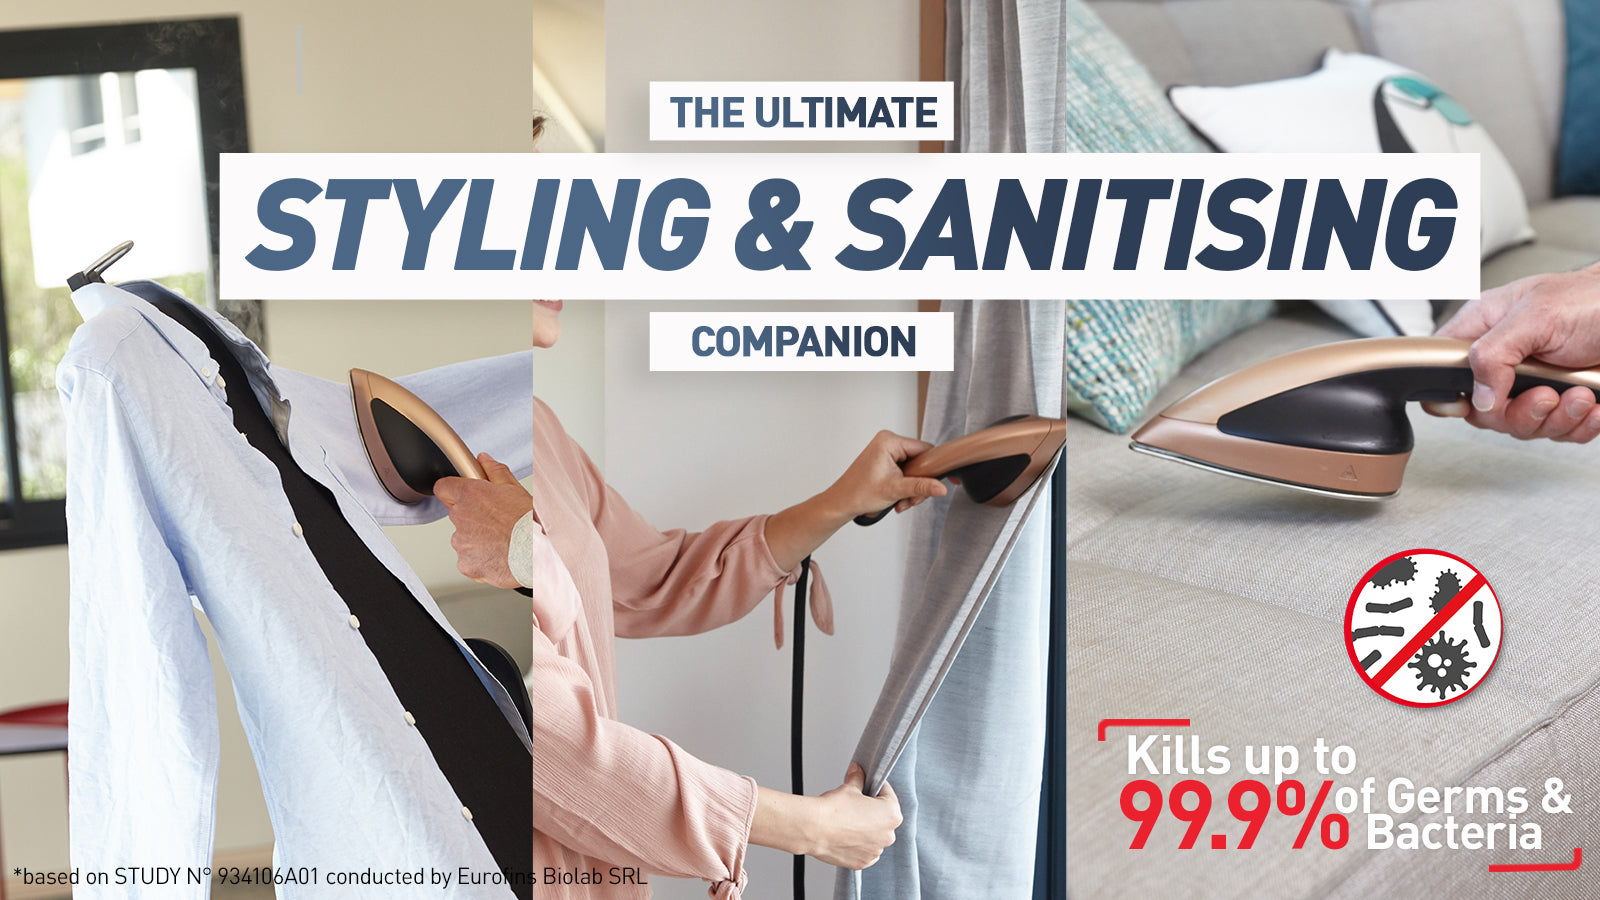 Sanitise your home with the best companion!